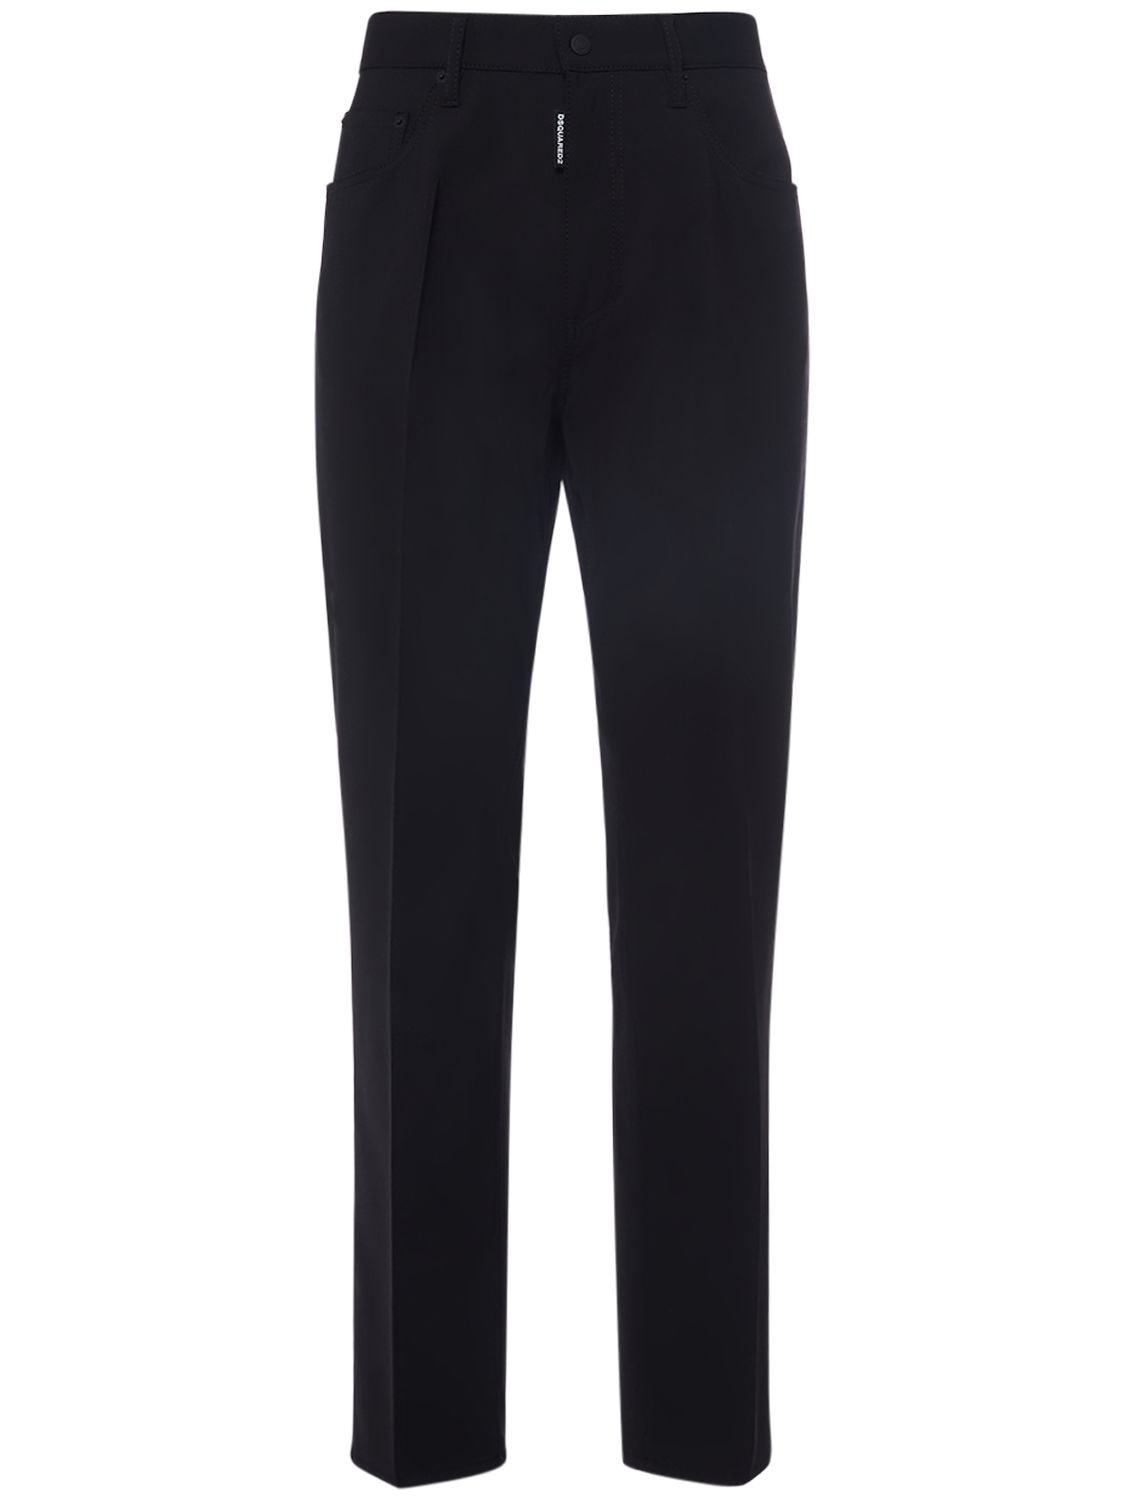 Image of Tailored 642 Fit Stretch Cotton Pants